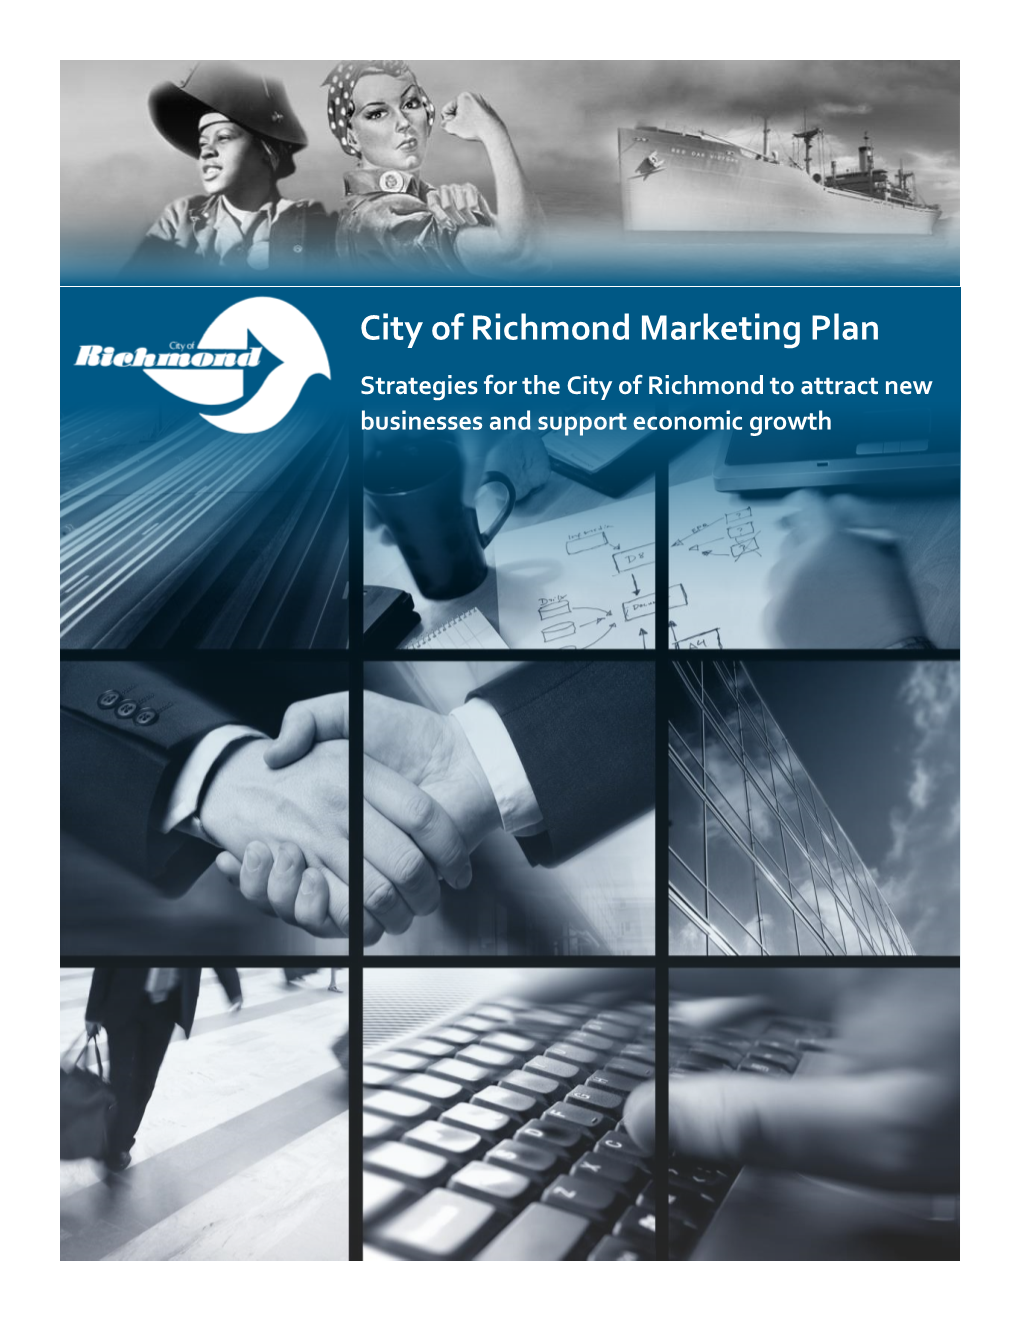 City of Richmond Marketing Plan Strategies for the City of Richmond to Attract New Businesses and Support Economic Growth